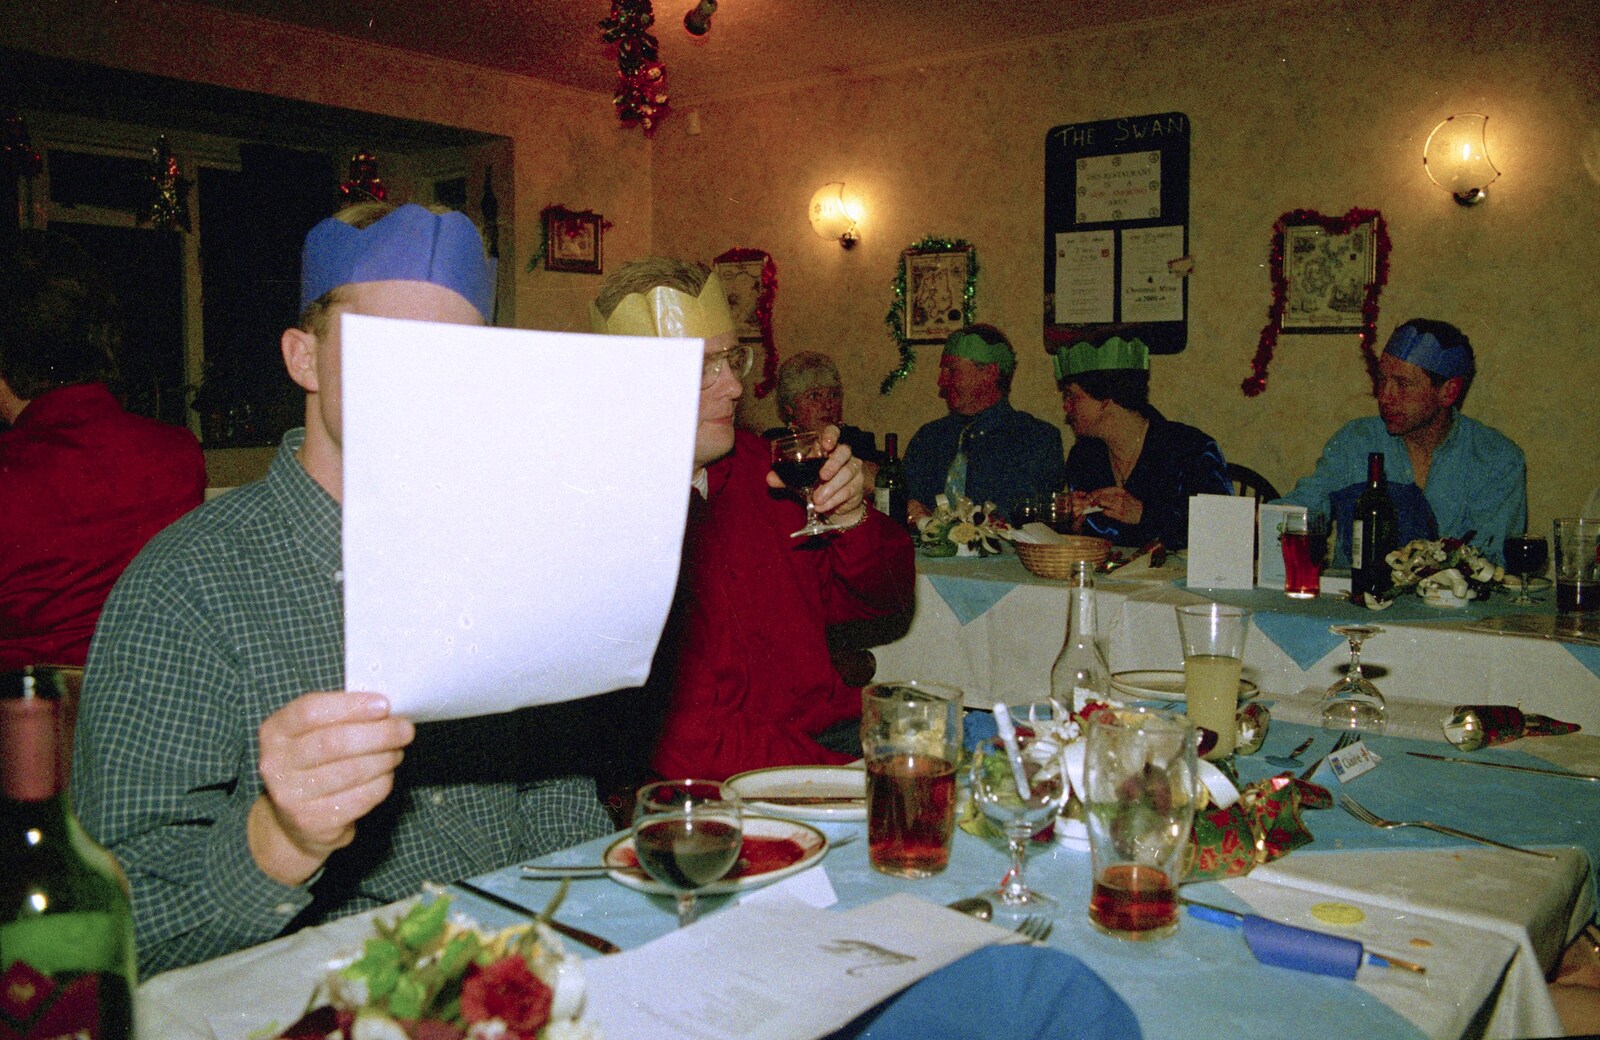 A hidden Paul looks at some paper from The BSCC Christmas Dinner, The Swan Inn, Brome, Suffolk - 8th December 2000